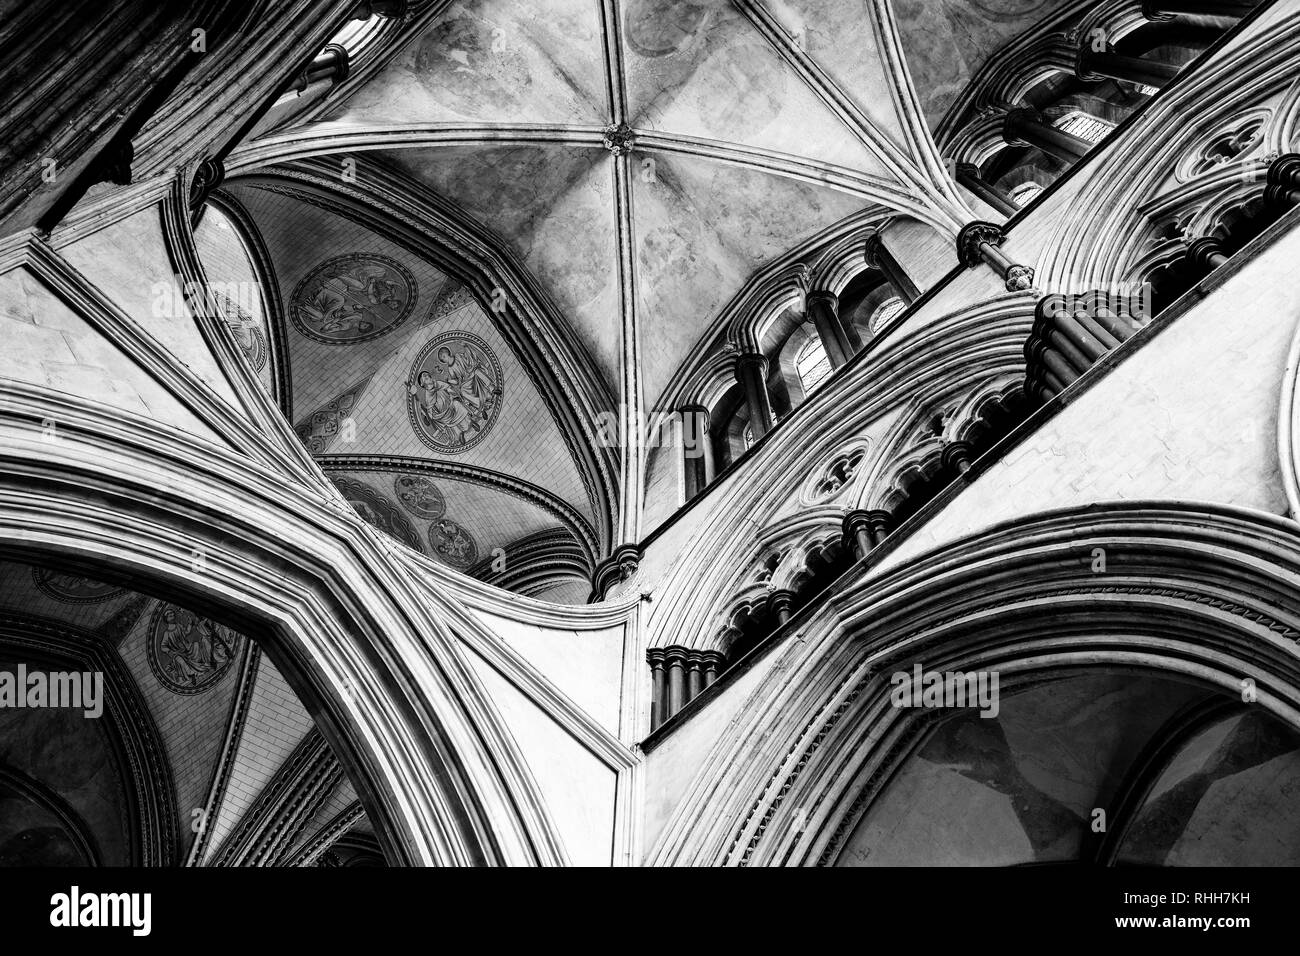 Looking up at a section of ceiling and ornate stone carved pillars and arches in Salisbury Cathedral in black and white Stock Photo